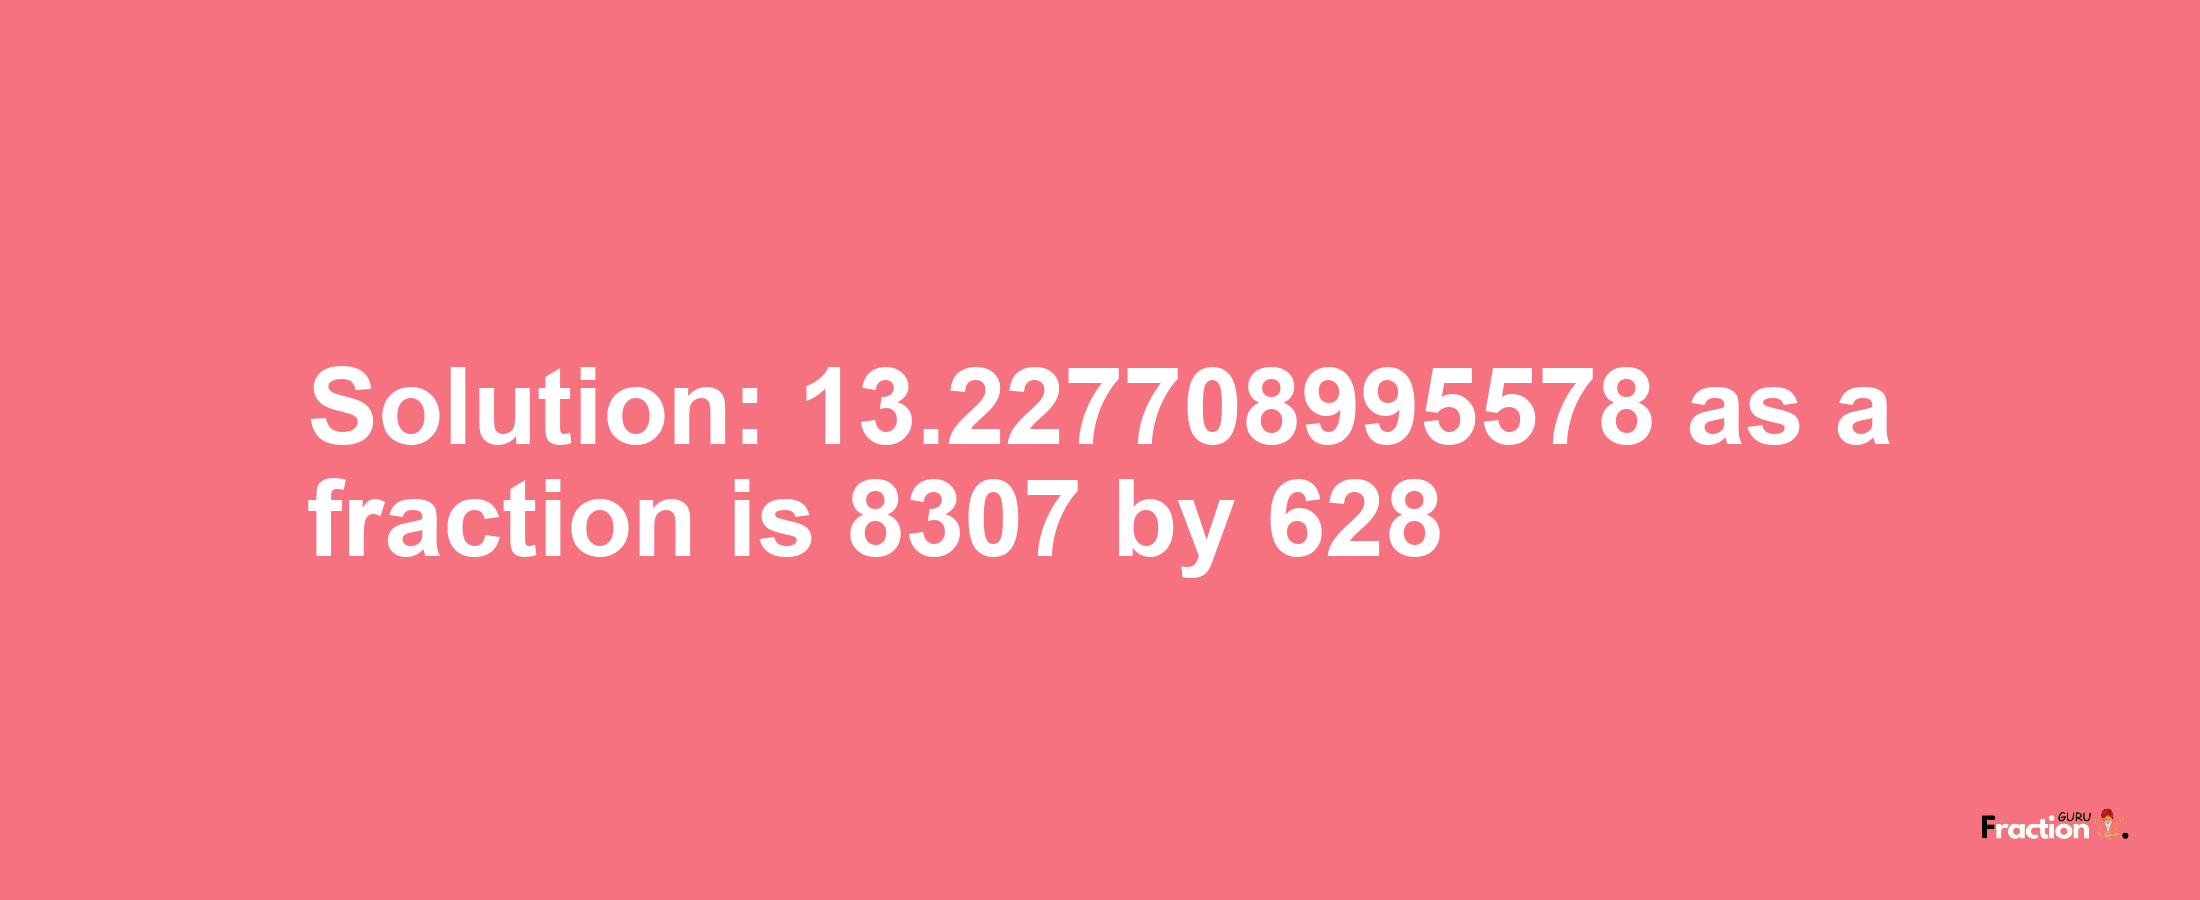 Solution:13.227708995578 as a fraction is 8307/628